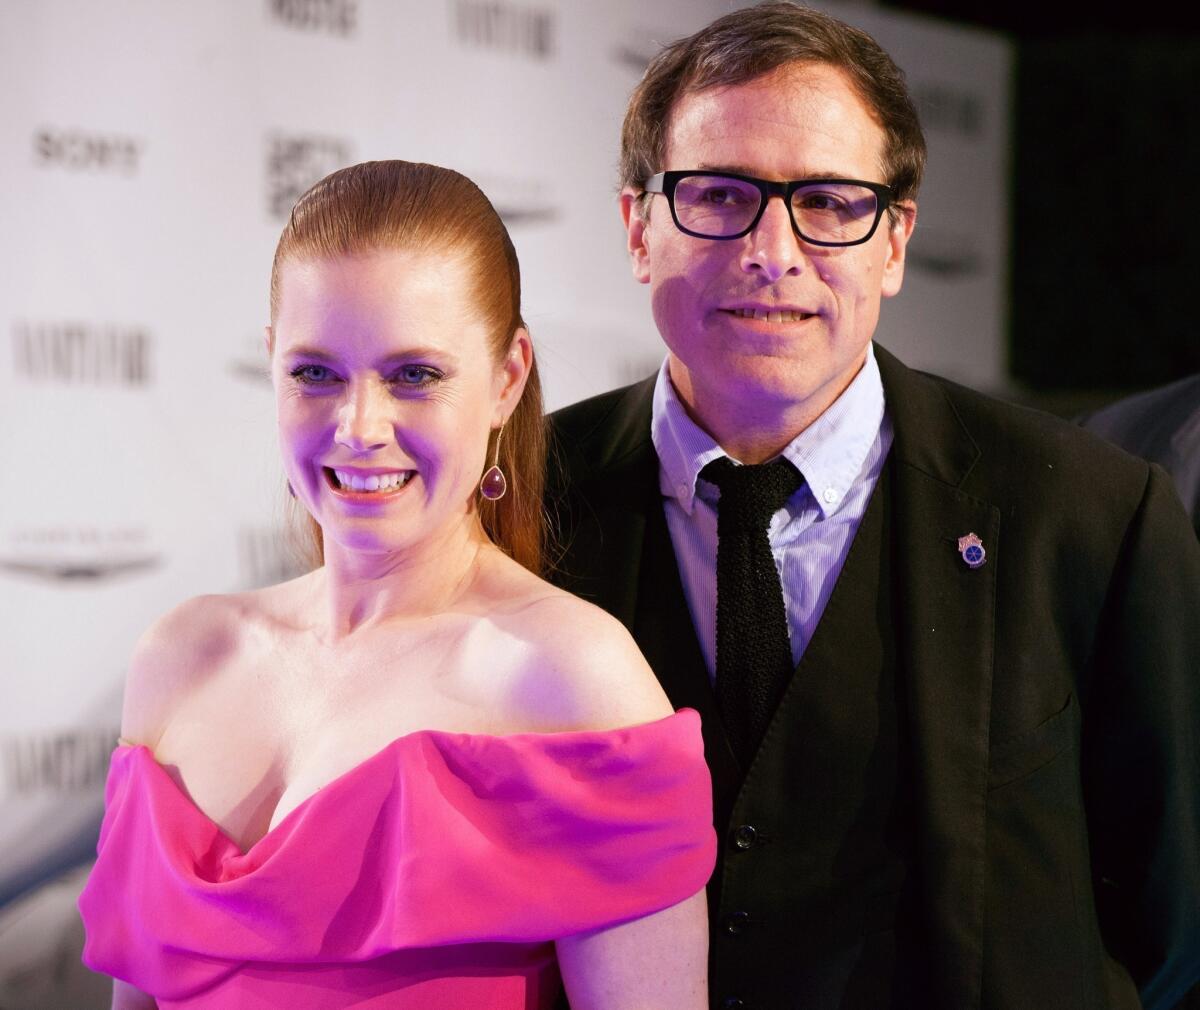 Amy Adams and David O. Russell arrive for the Vanity Fair Campaign Hollywood "American Hustle" toast sponsored by Chrysler.